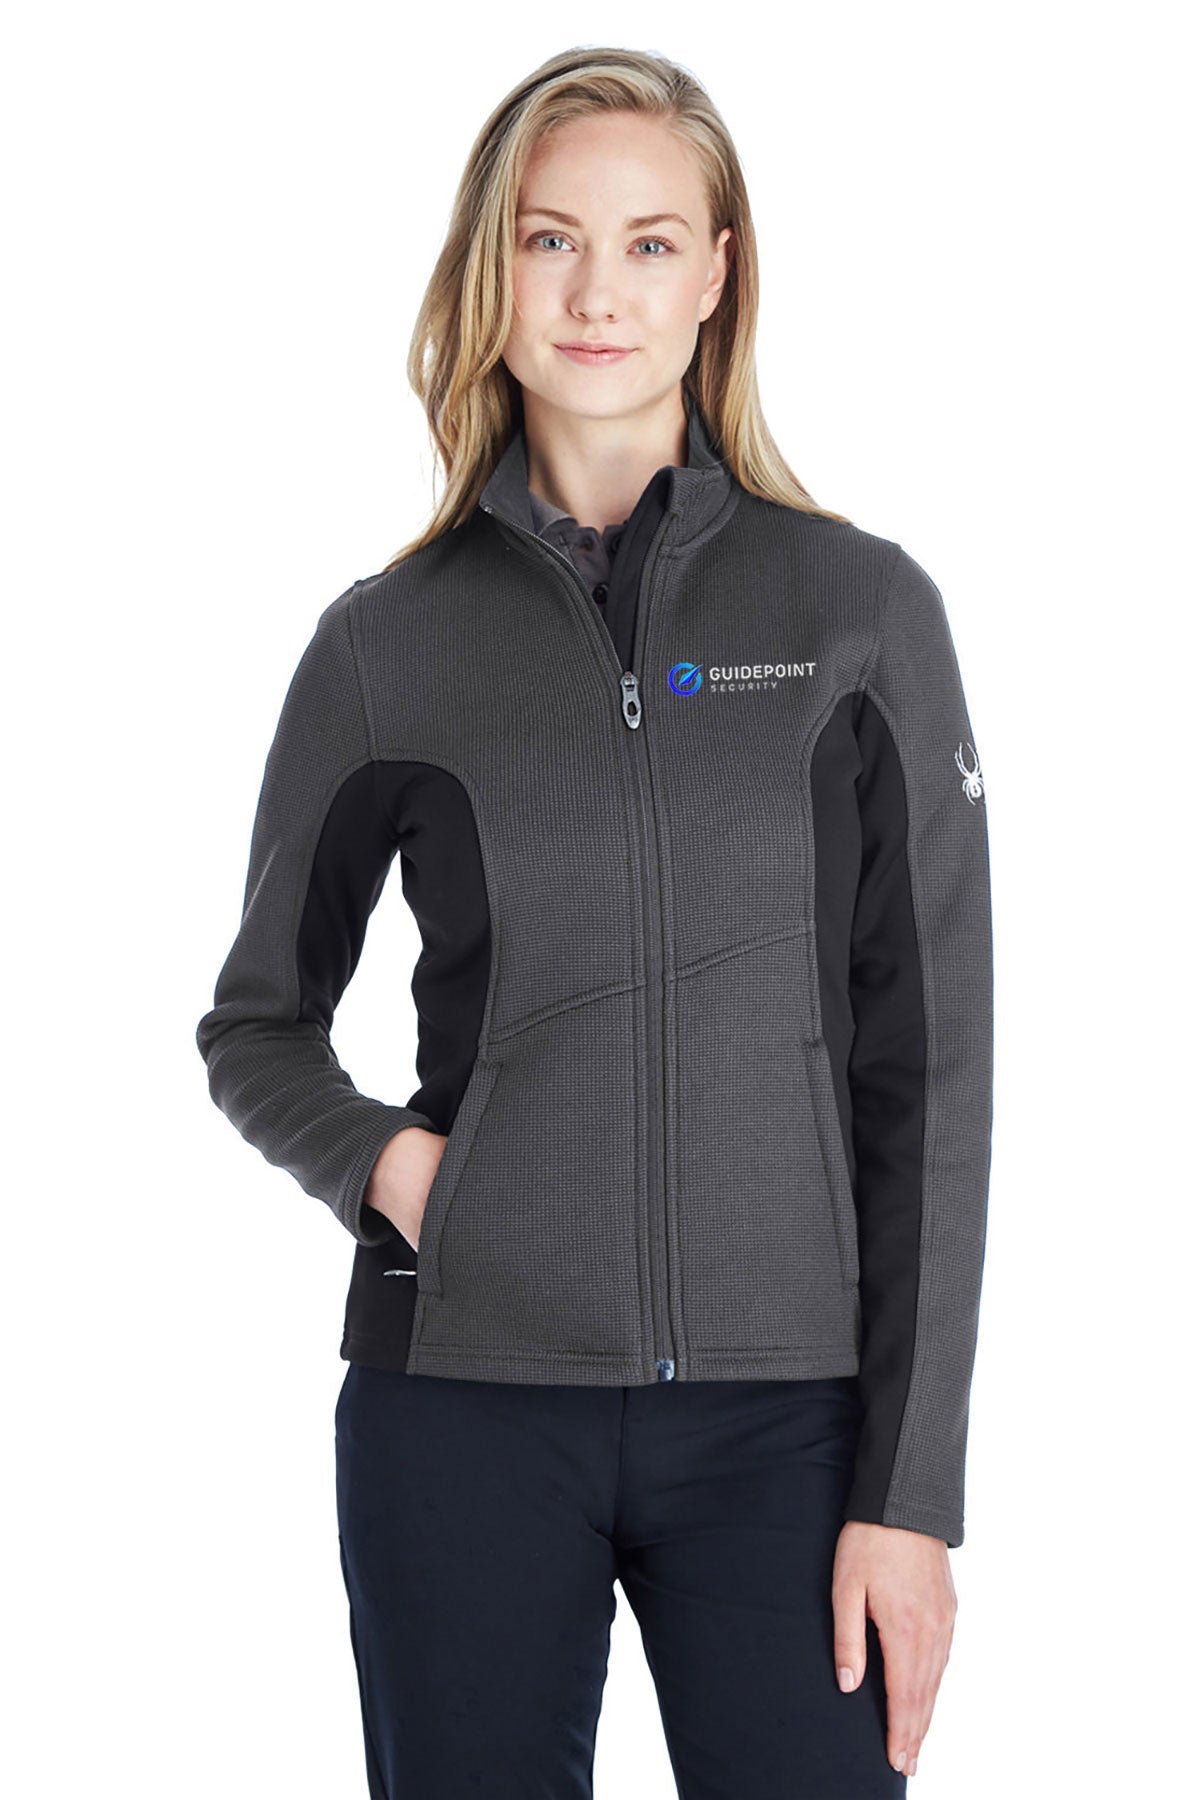 Spyder Ladies Constant Full Zip Sweaters, Fleece Polar/ Blk/ Wht [GuidePoint Security]